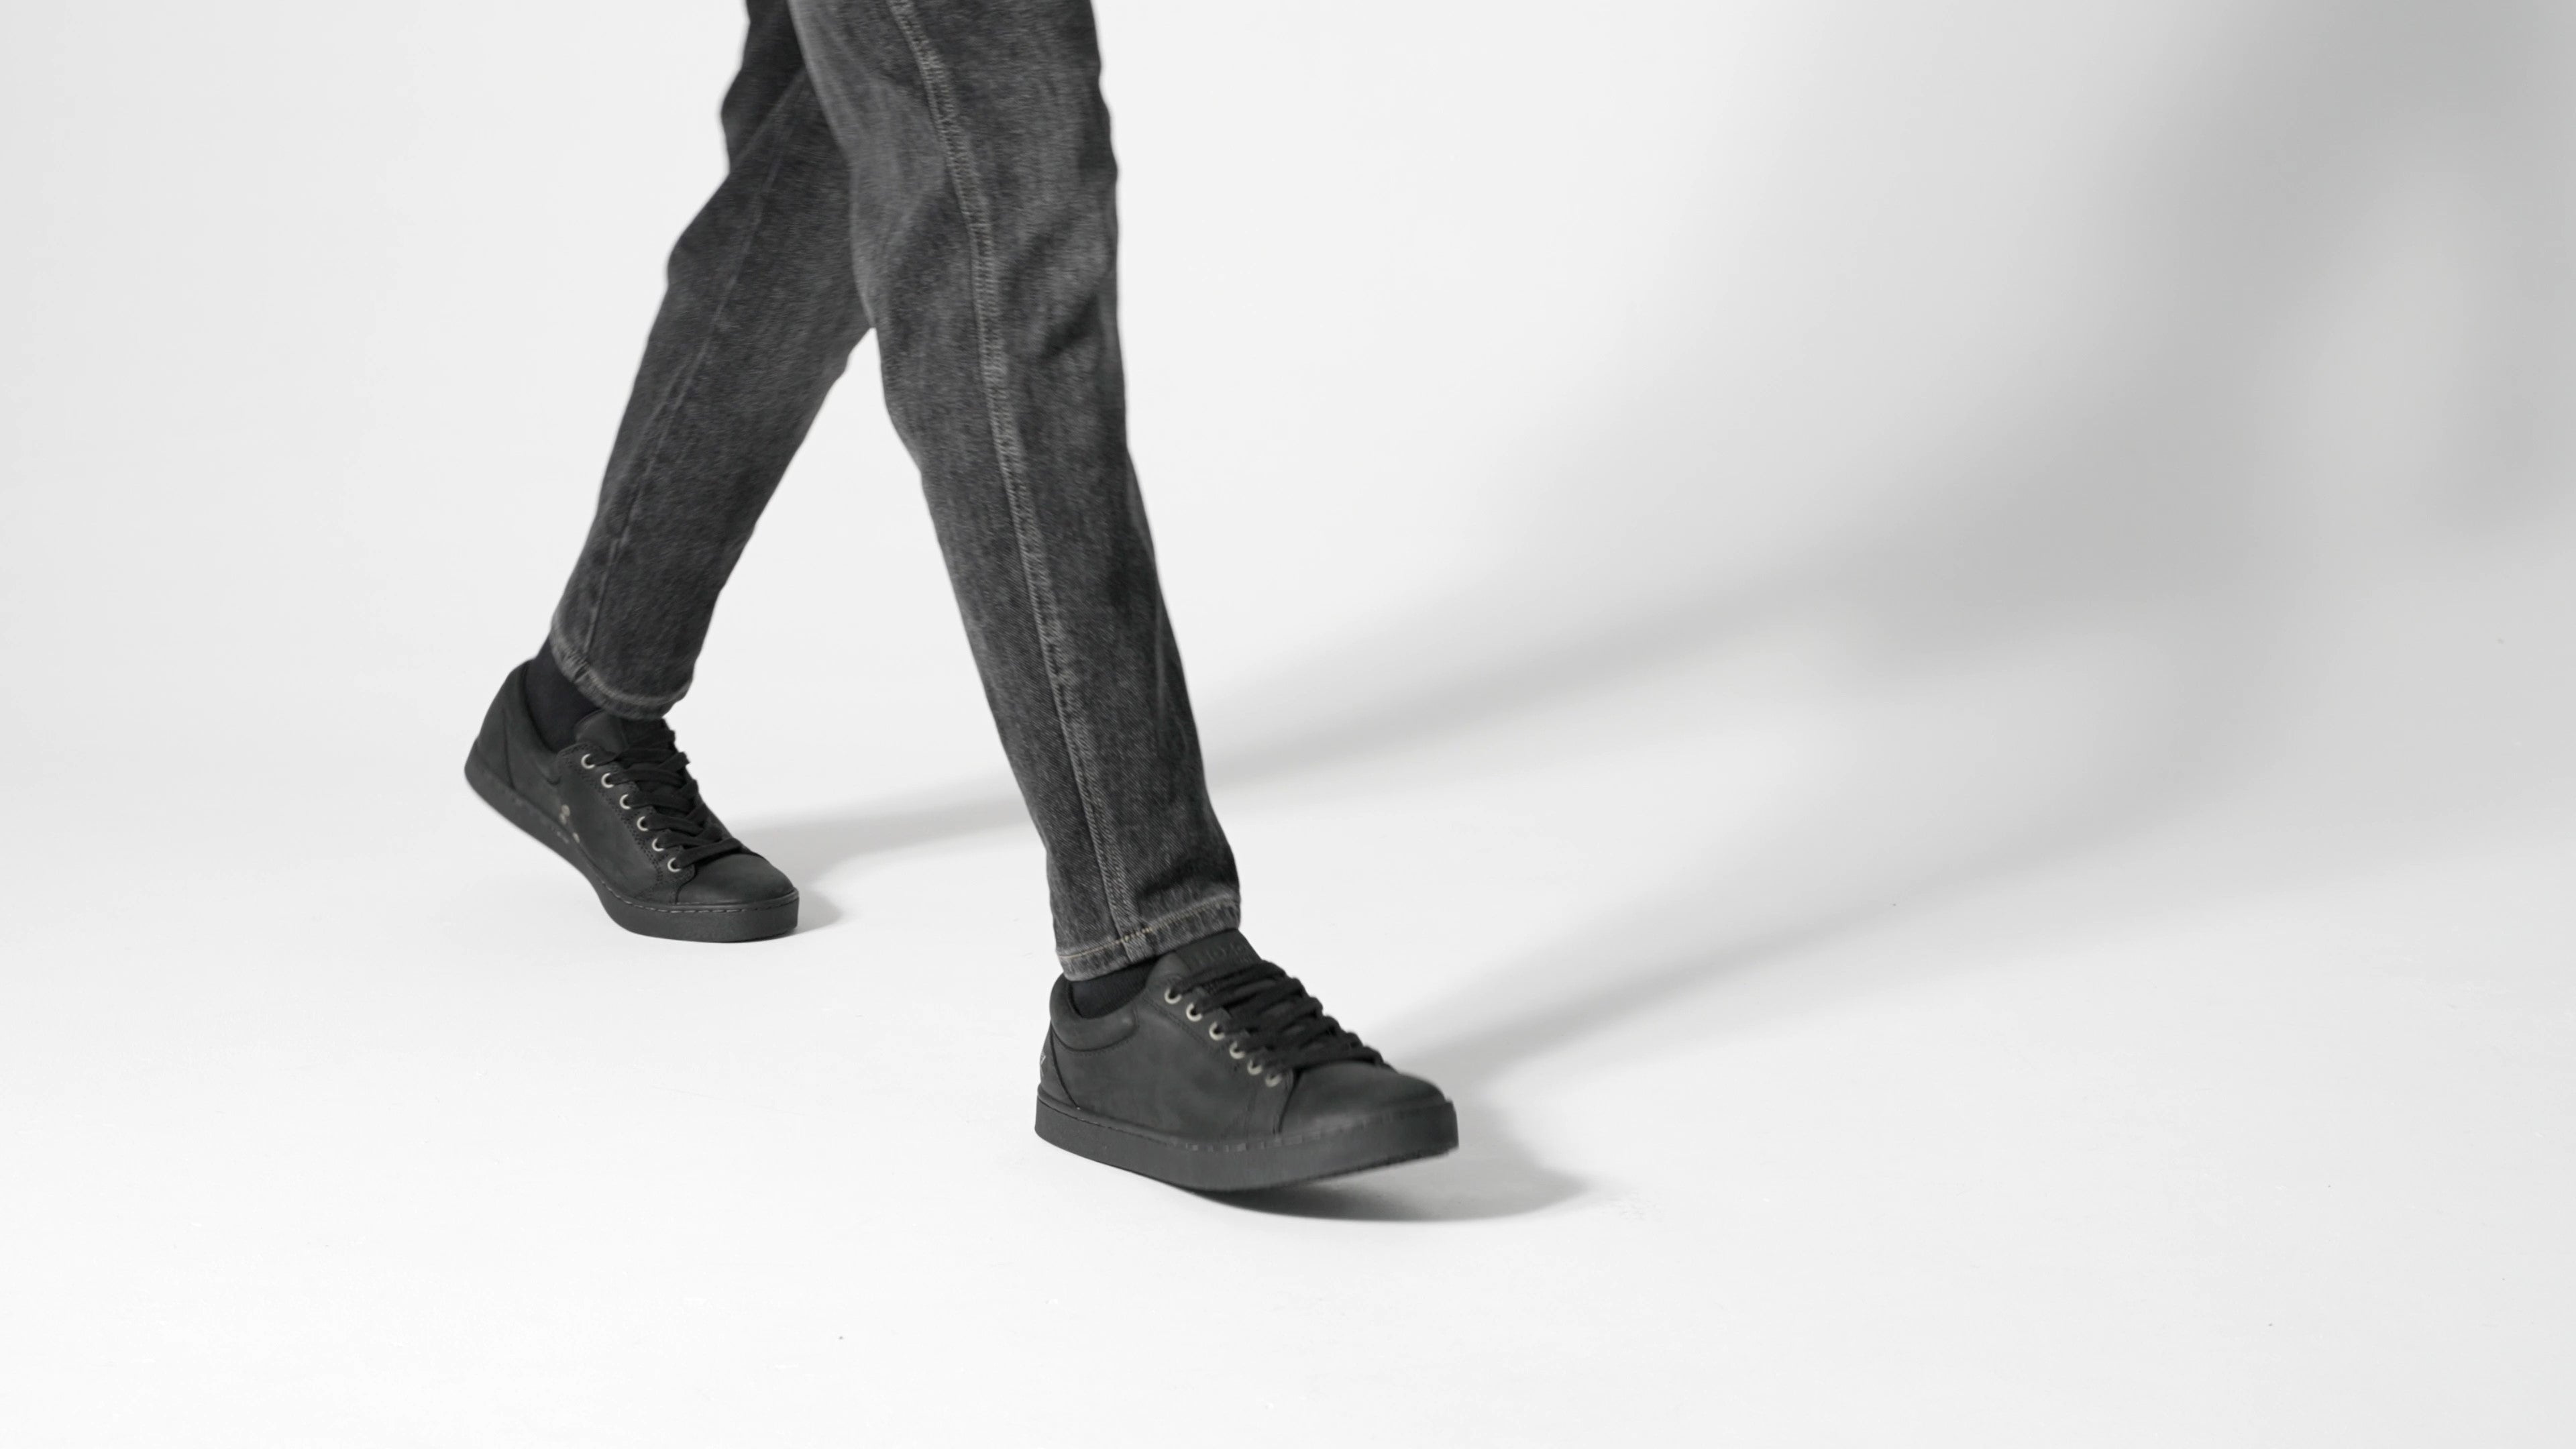 Mozo's Finn is an slip-resistant, water-resistant and easy-to-clean shoe, product video.